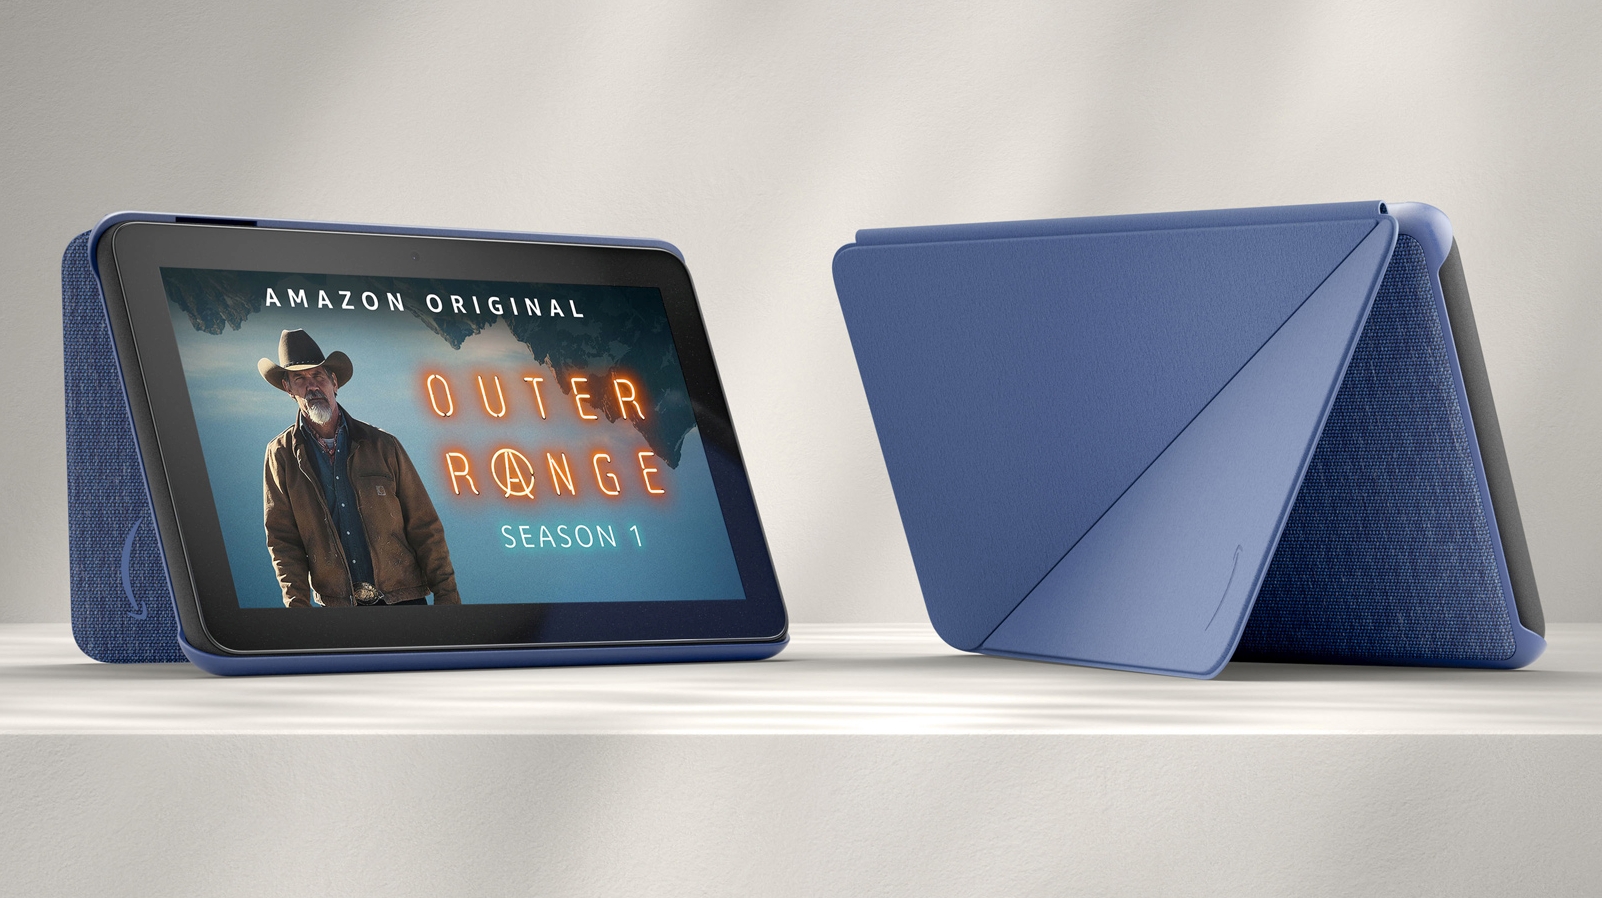 Amazon’s new Fire 7 launched as a super-cheap alternative to an iPad mini